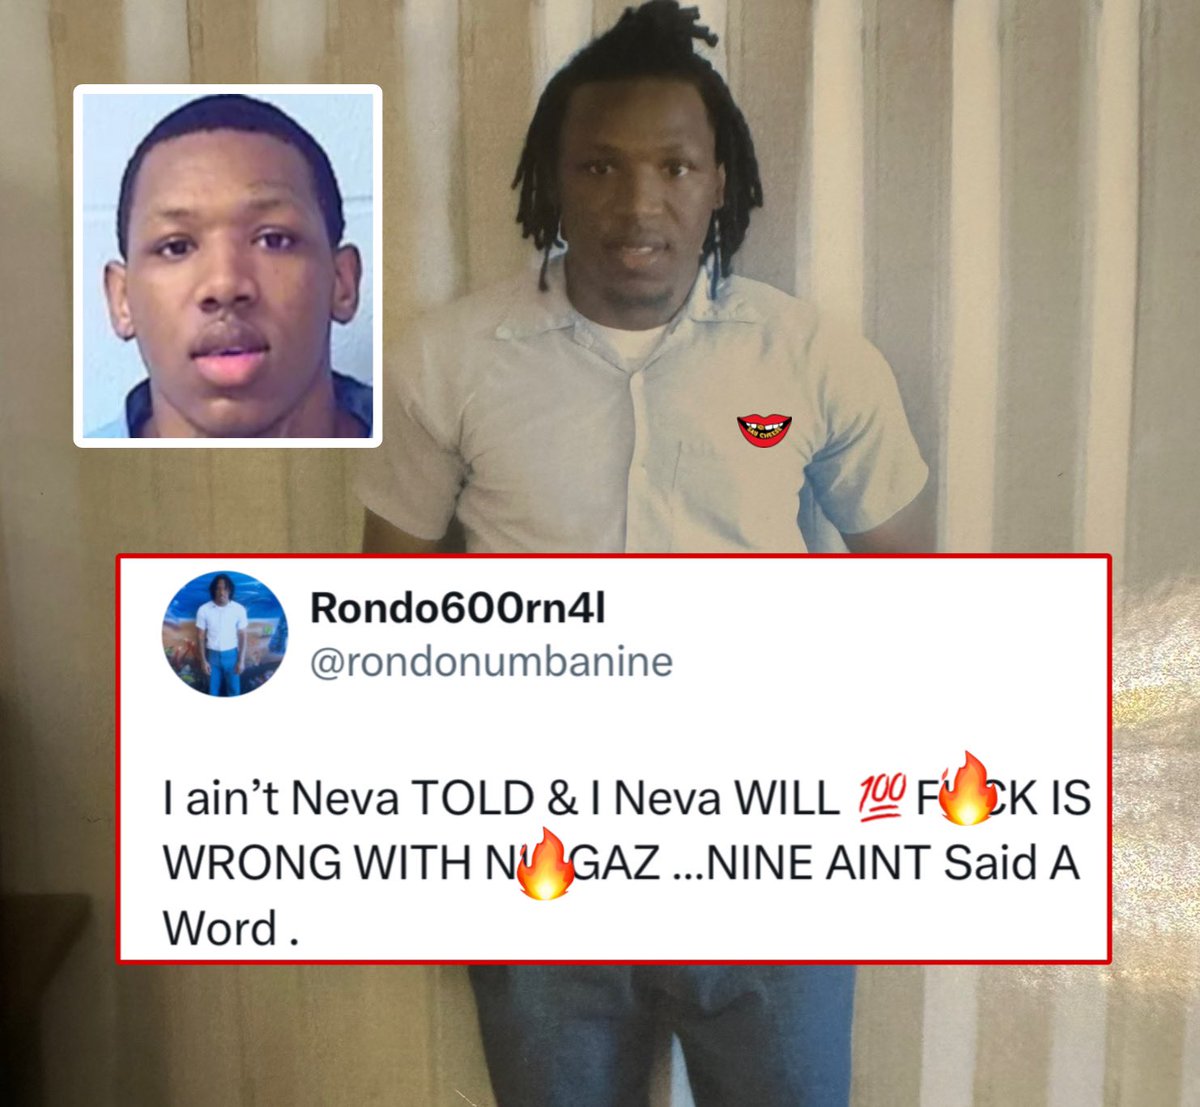 RondoNumbaNine responds to CDai accusing him of snitching: “I ain’t never told & I never will”